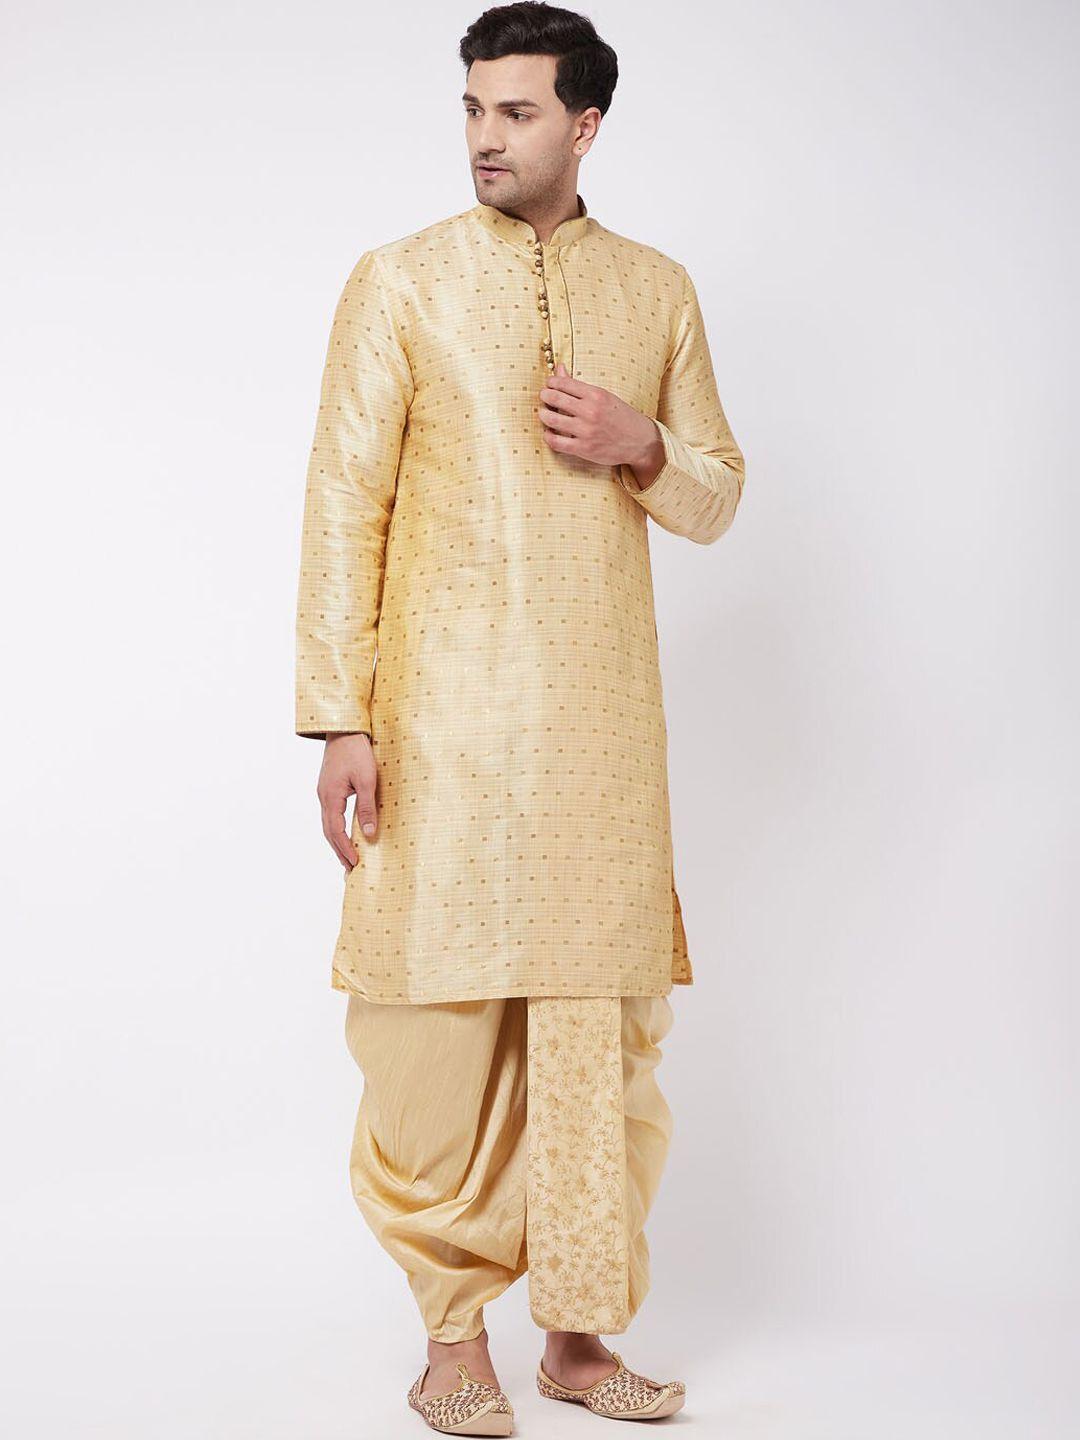 vm men woven-design straight kurts with dhotipant